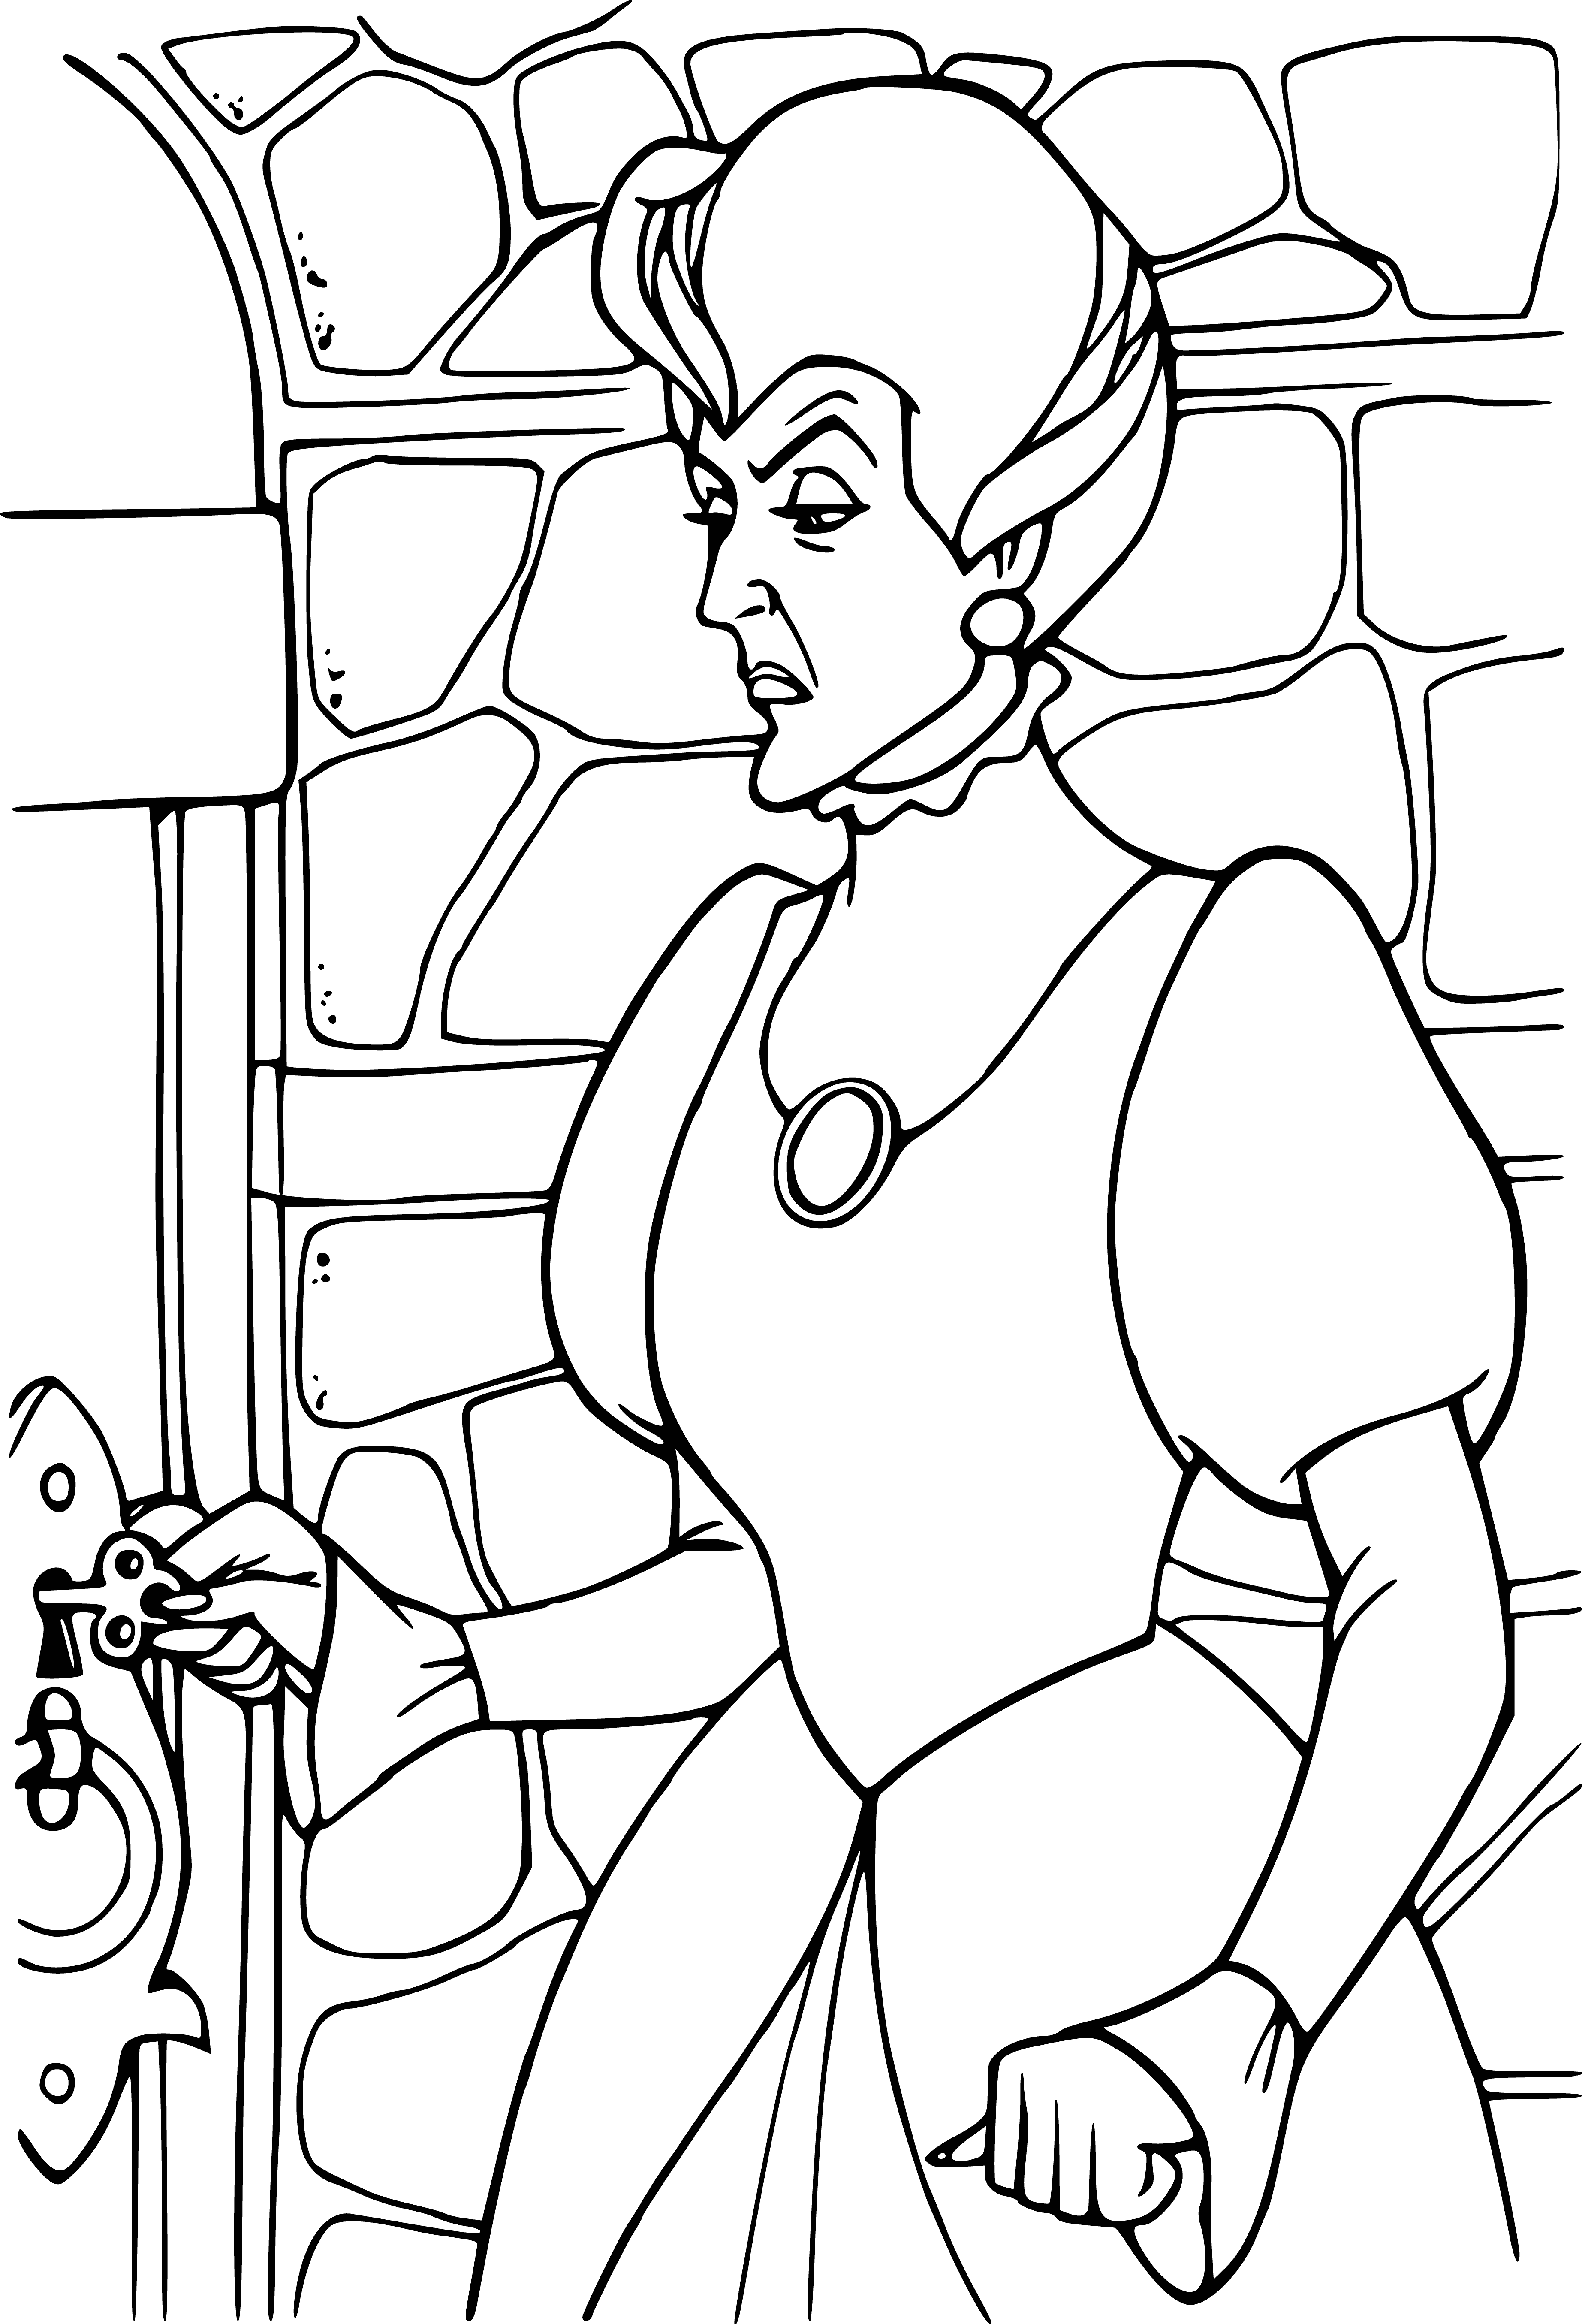 coloring page: Two women stand close, taller one smiling wickedly and shorter one looking scared.